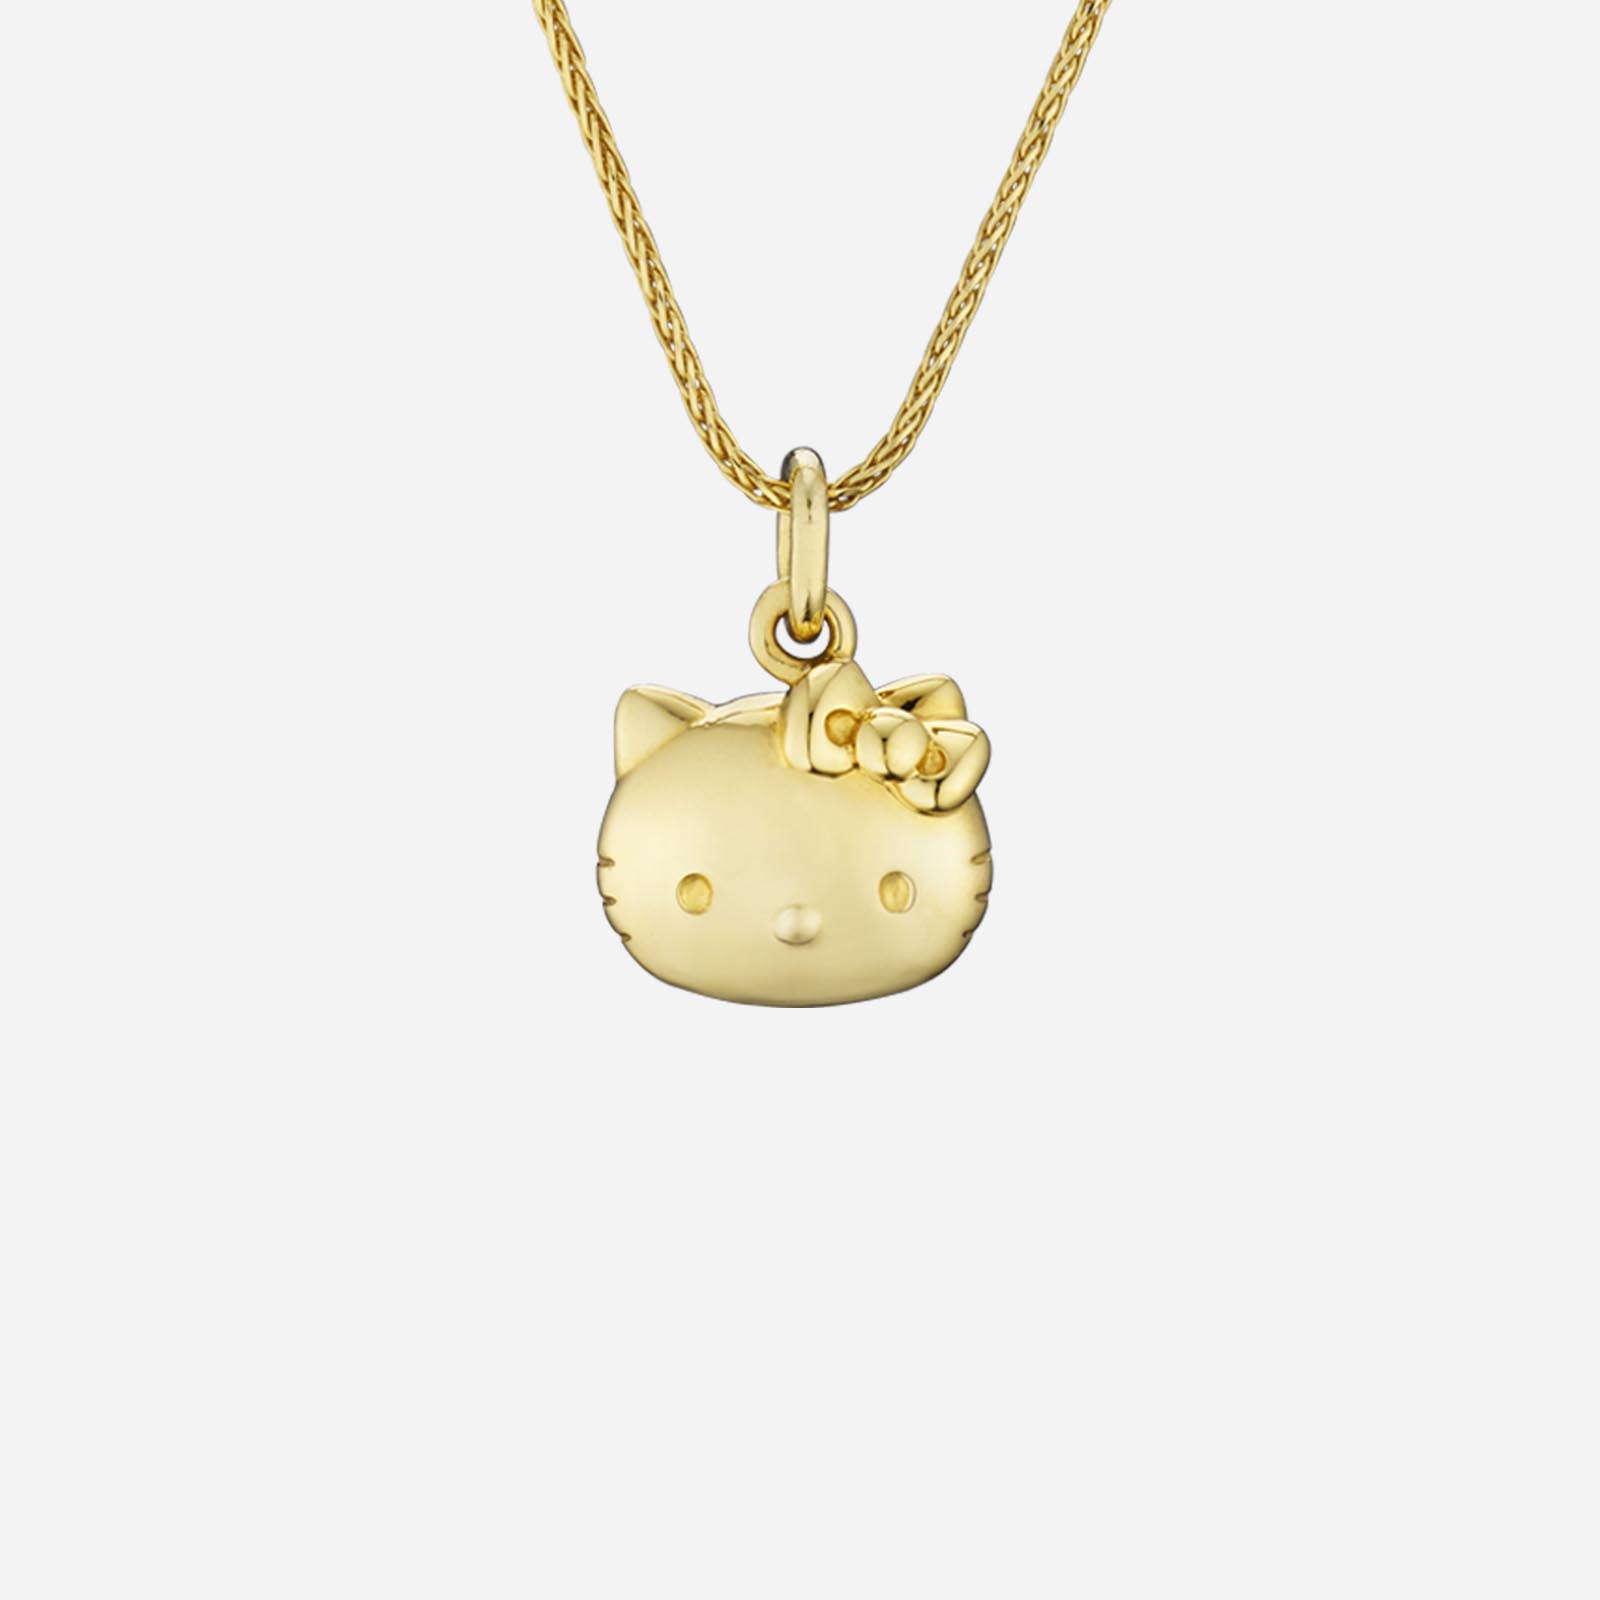 Poh Heng Hello Kitty Pendant in 22K Yellow Gold	